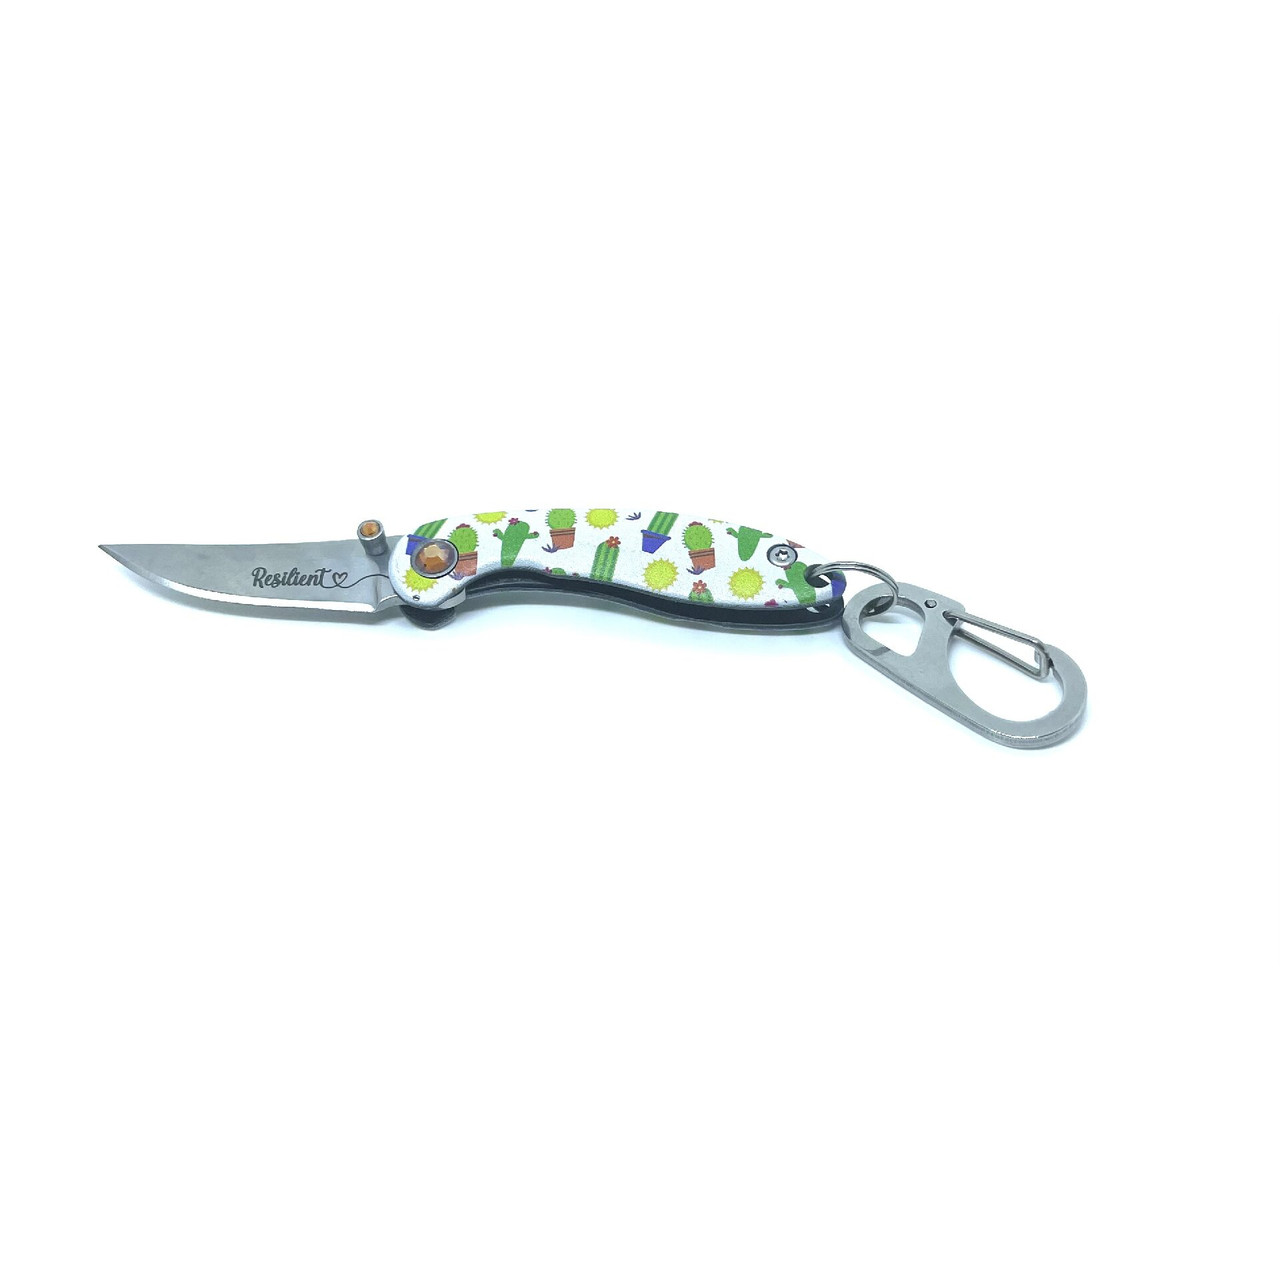 Brighten Blades Resilient Keychain Folding Knife (BB018) 1.65 in Mirror 8Cr13MoV Clip Point Blade w/ "Resilient" Blade Etching, Full-Color Cactus Print Handle